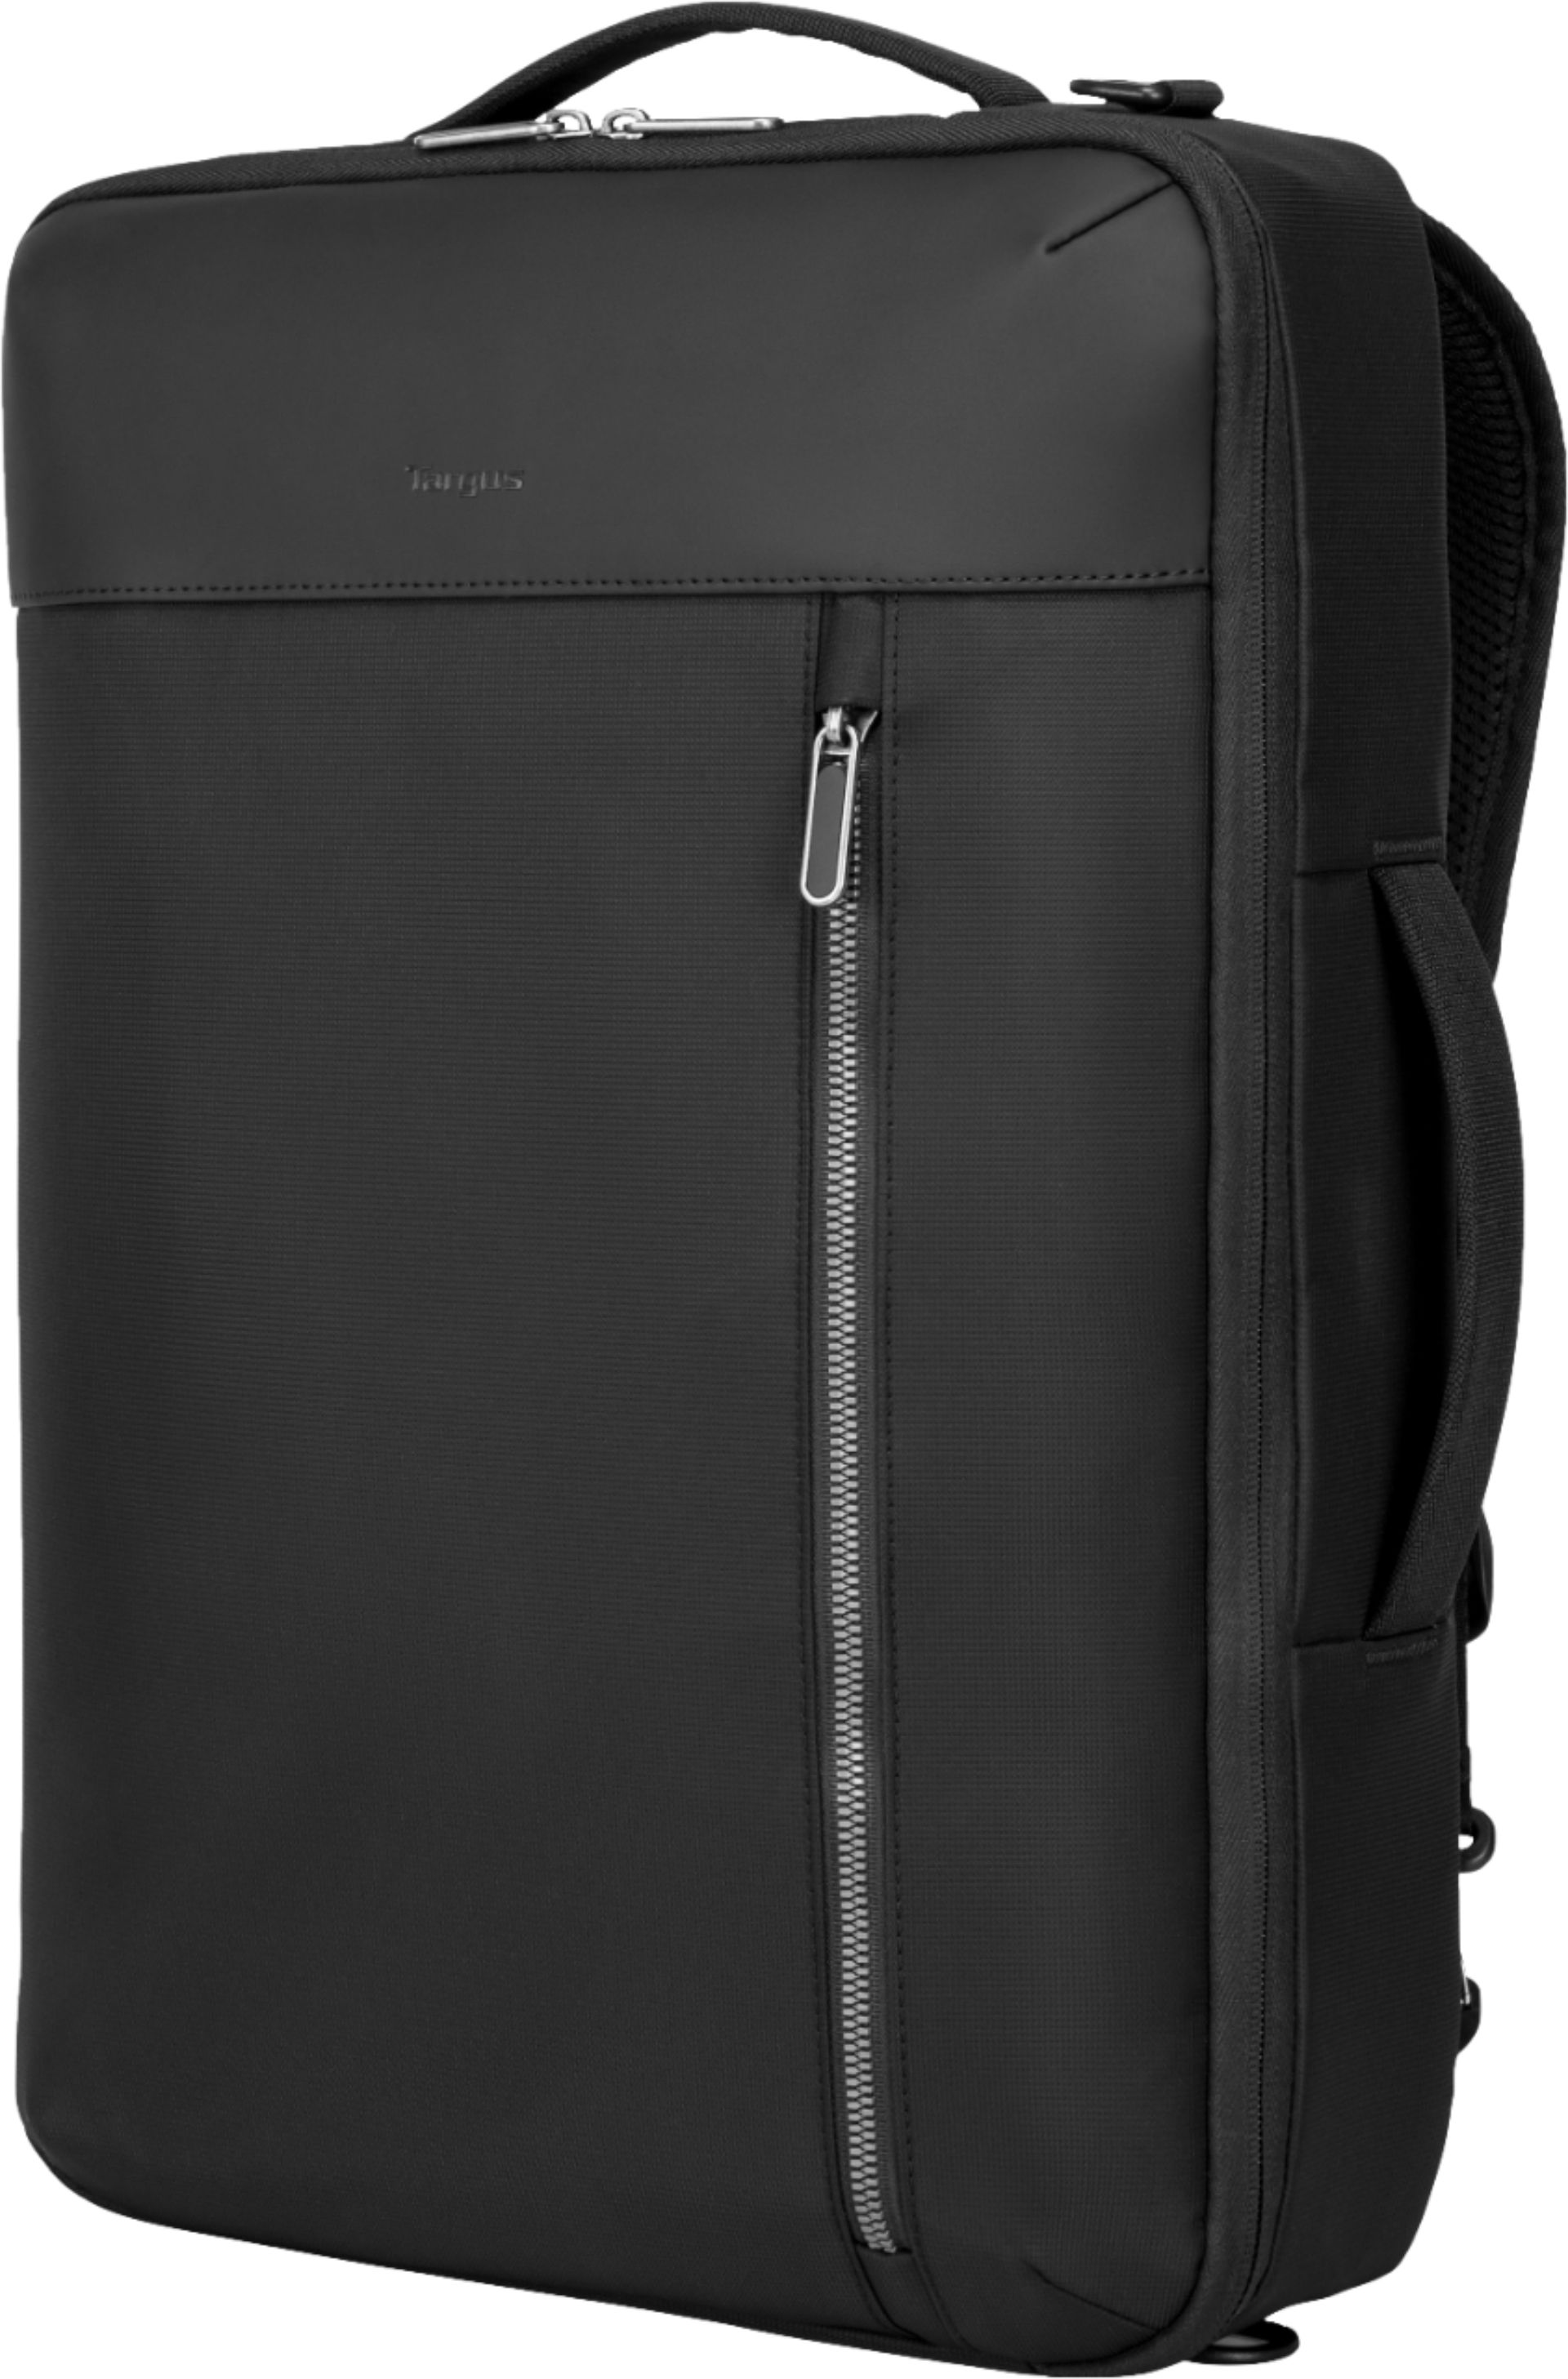 Questions and Answers: Targus Urban Convertible Backpack for 15.6 ...